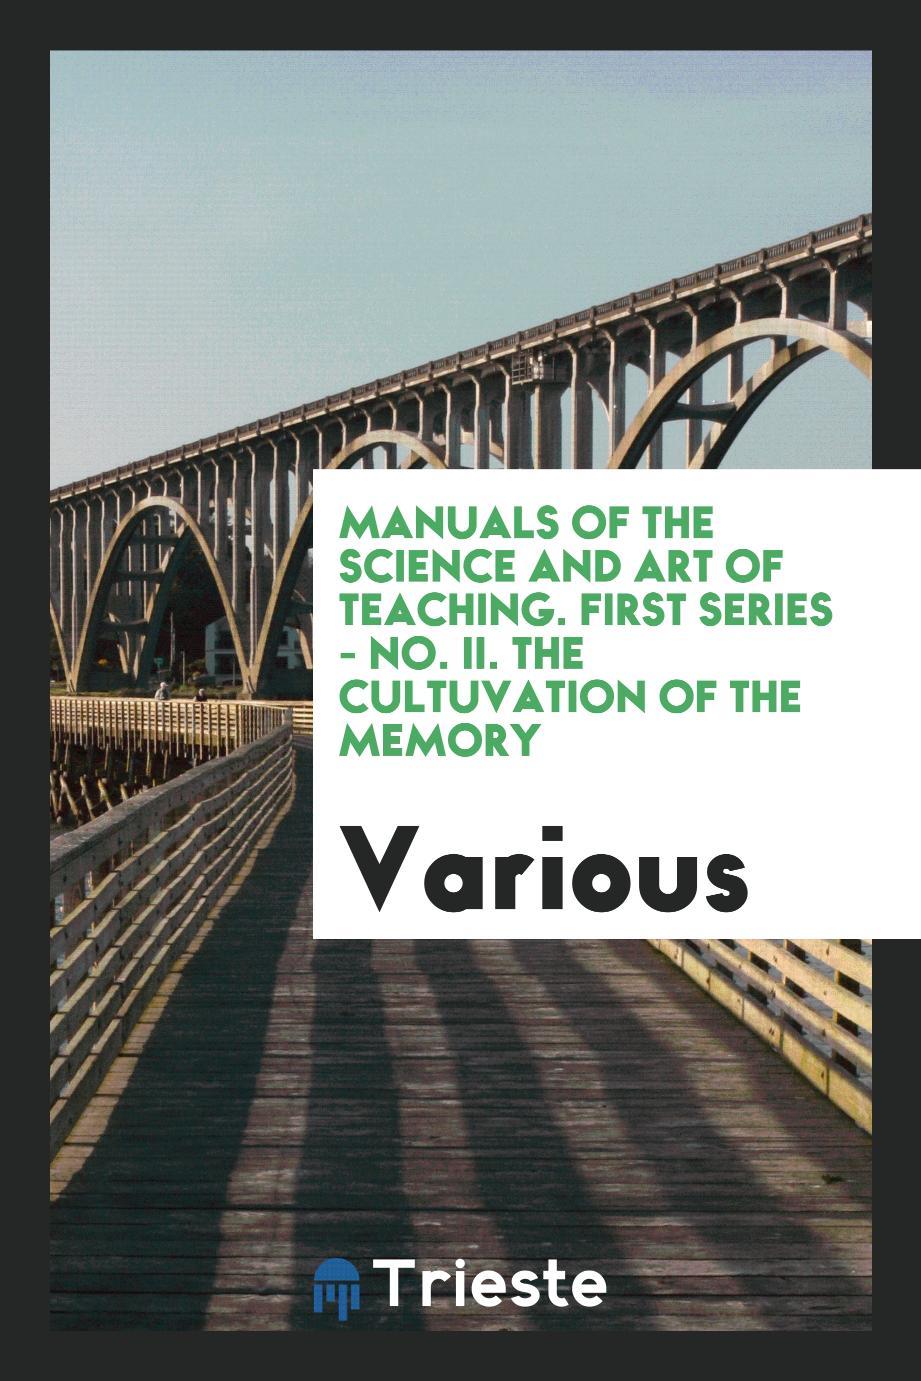 Manuals of the science and art of teaching. First series - No. II. The cultuvation of the memory